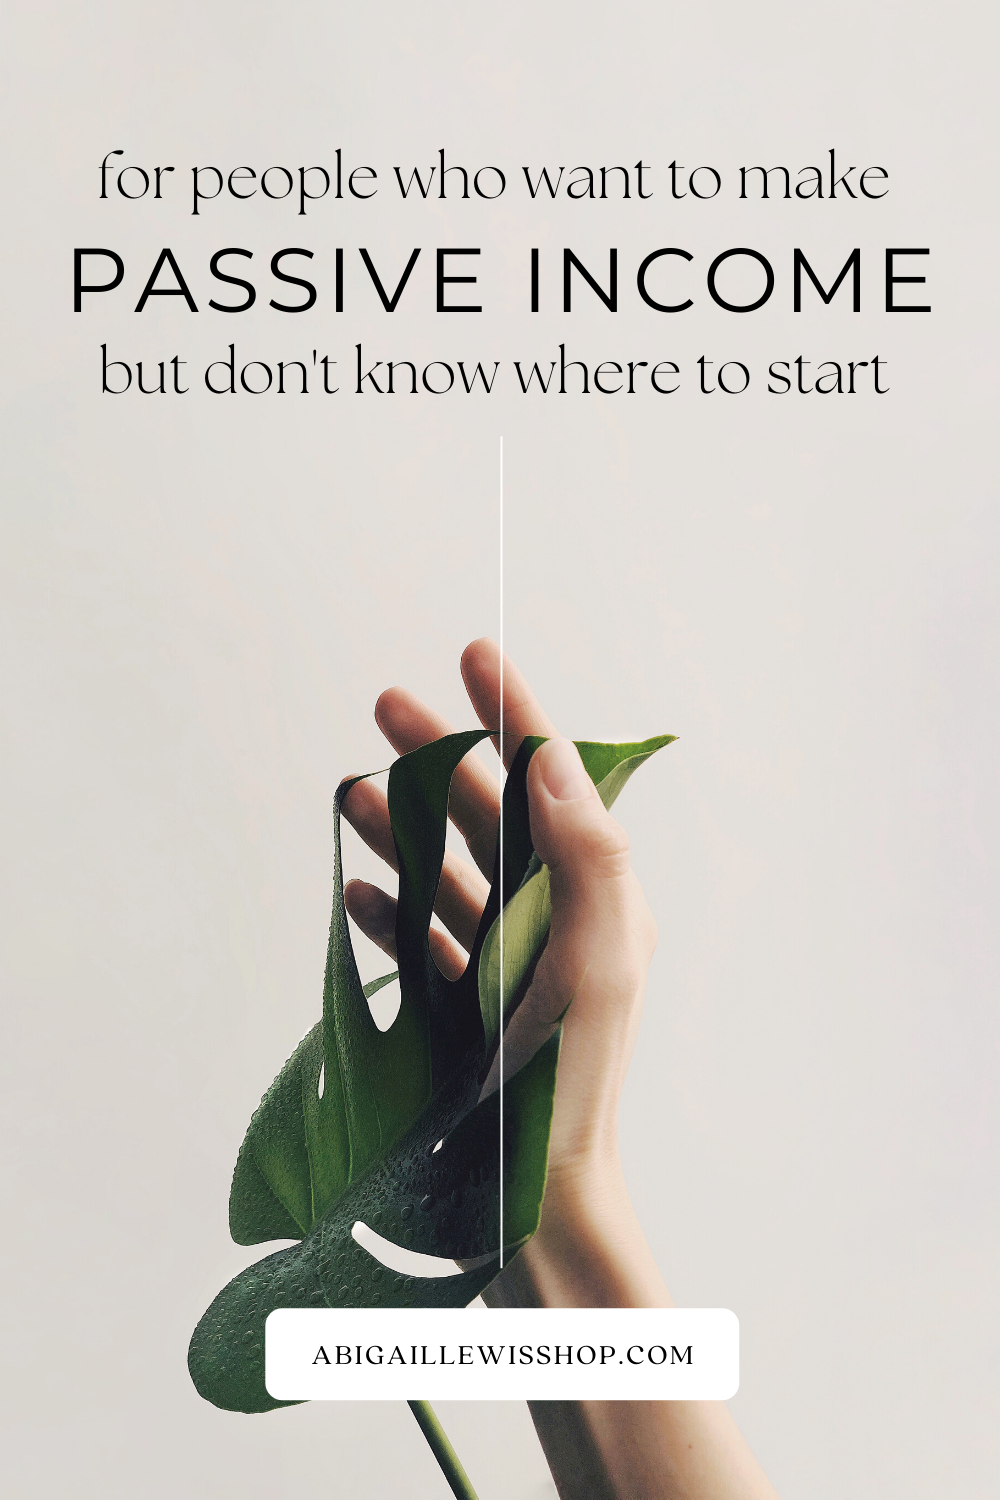 For People Who Want to Make Passive Income, But Don't Know How to Start